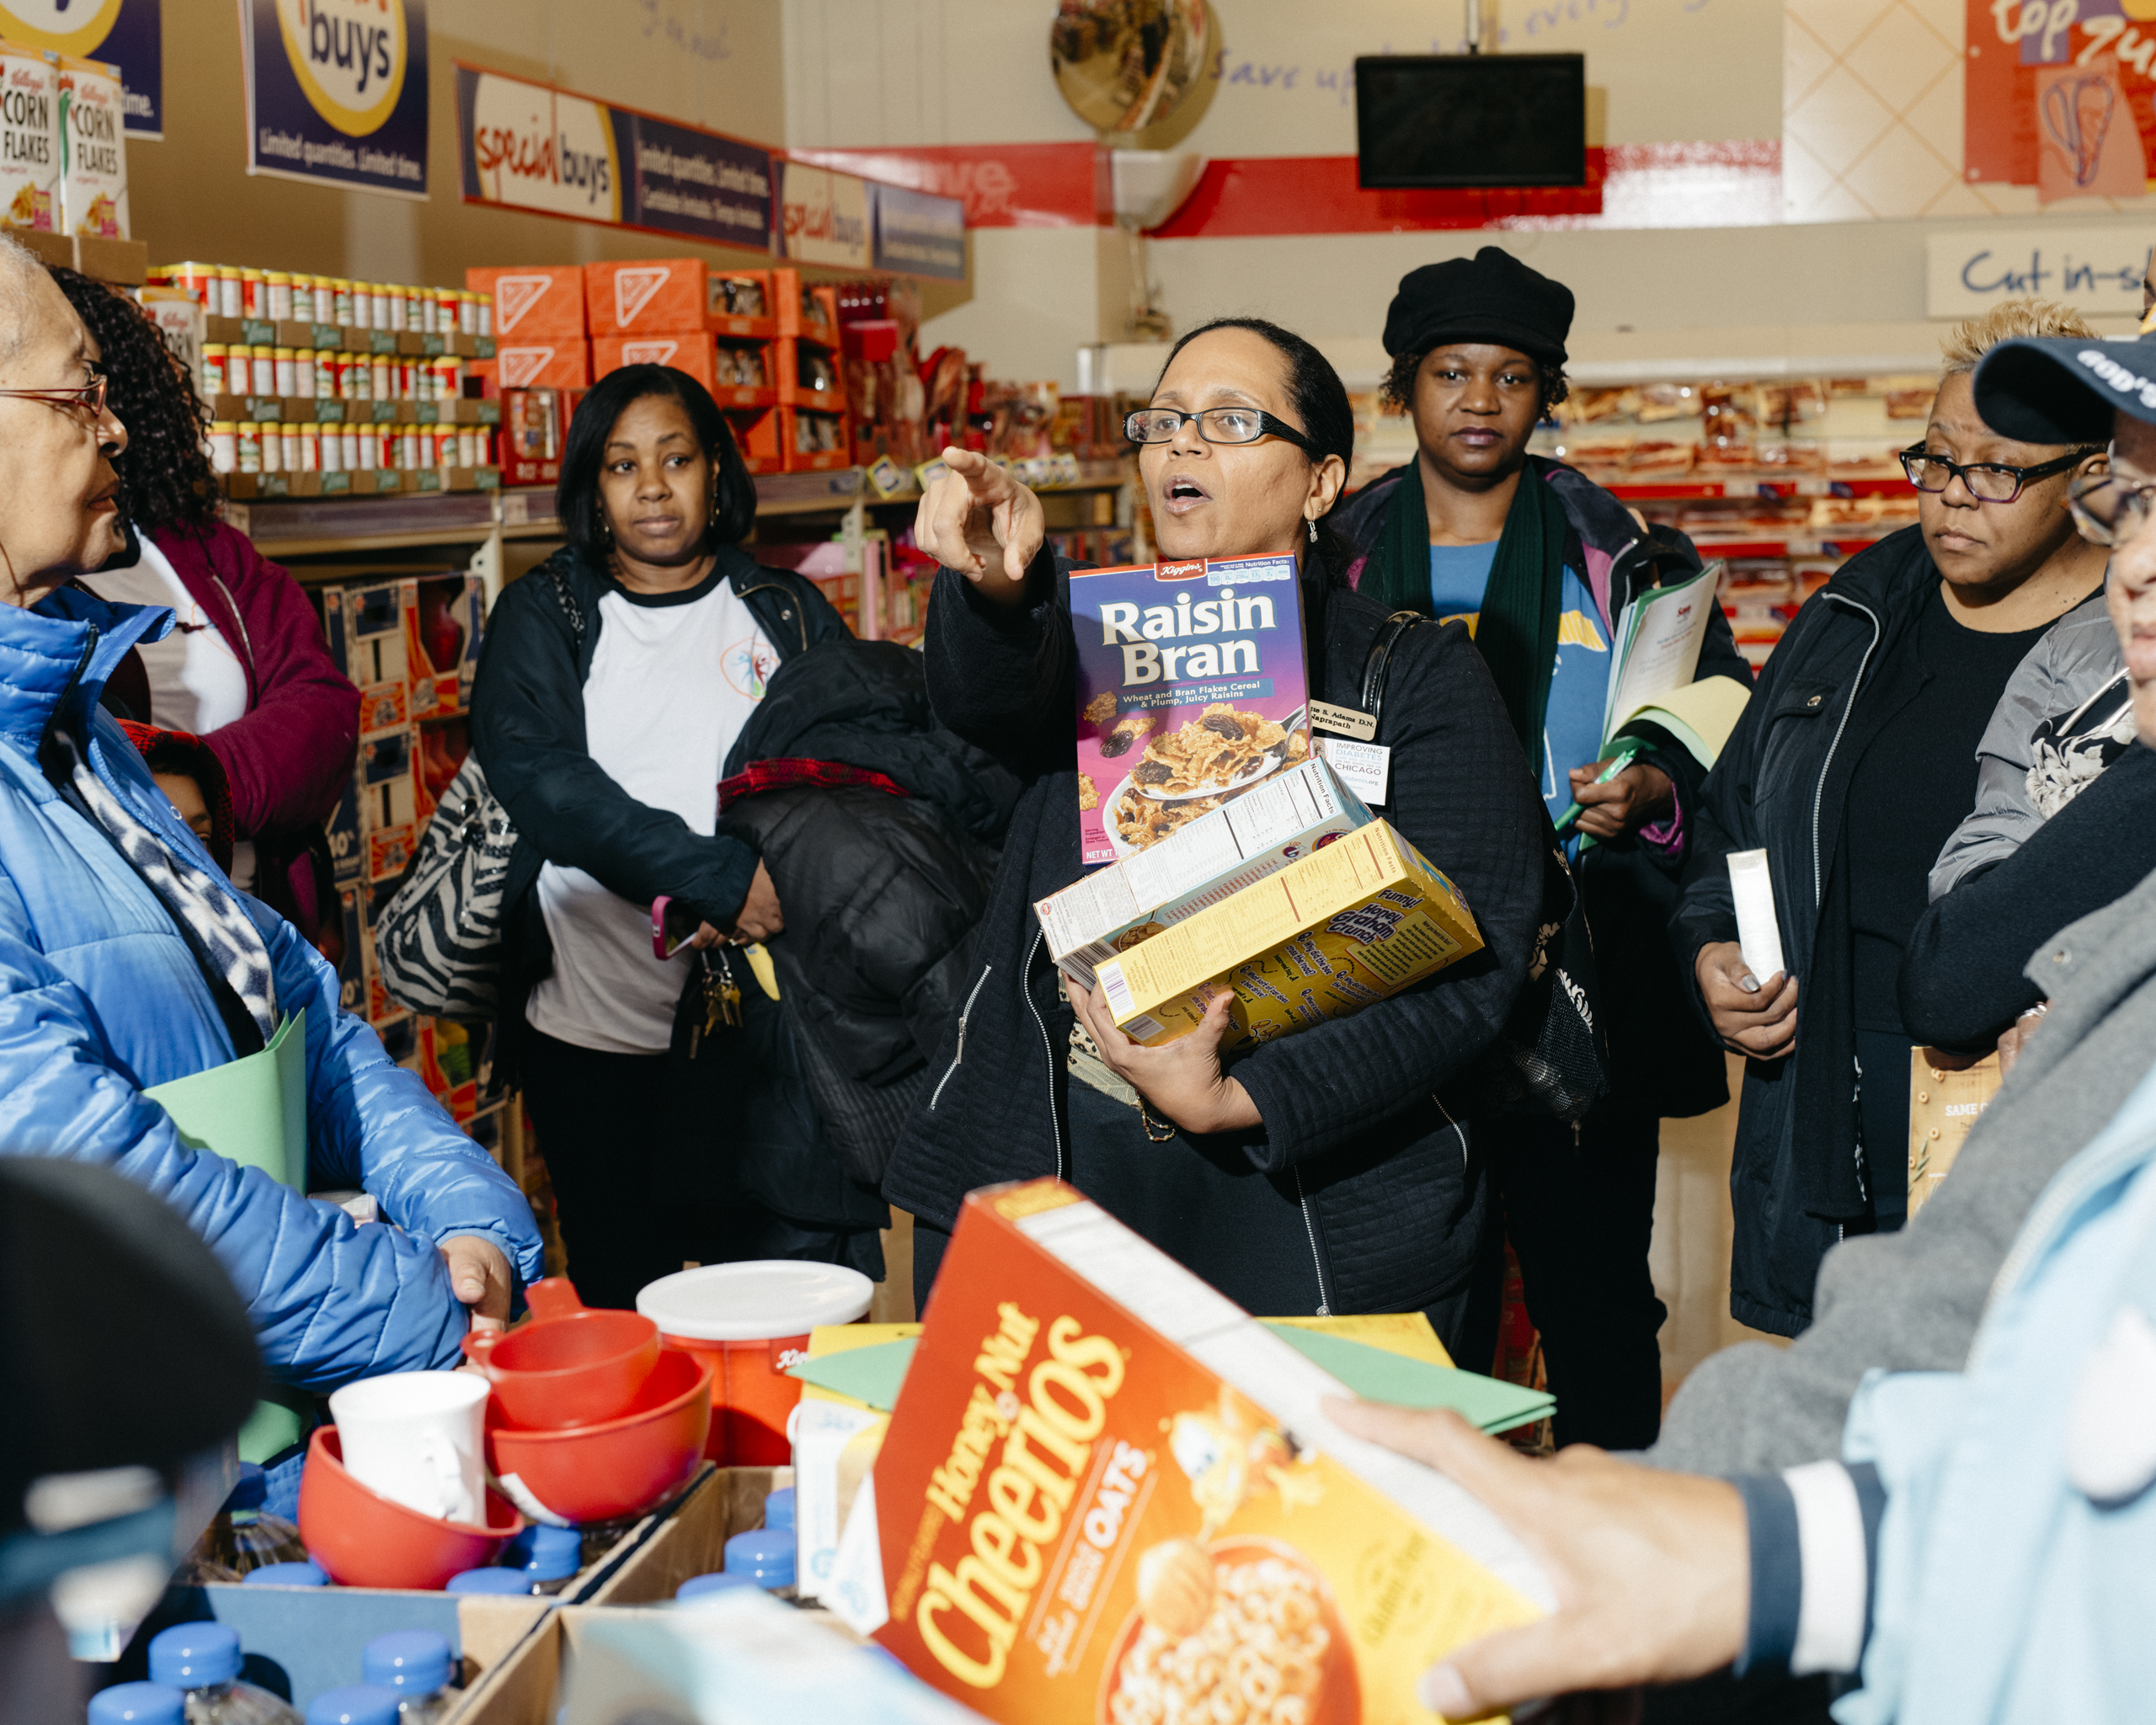 The South Side Diabetes Project teaches shoppers how to count carbohydrates (Photograph by Ryan Lowry for TIME magazine)